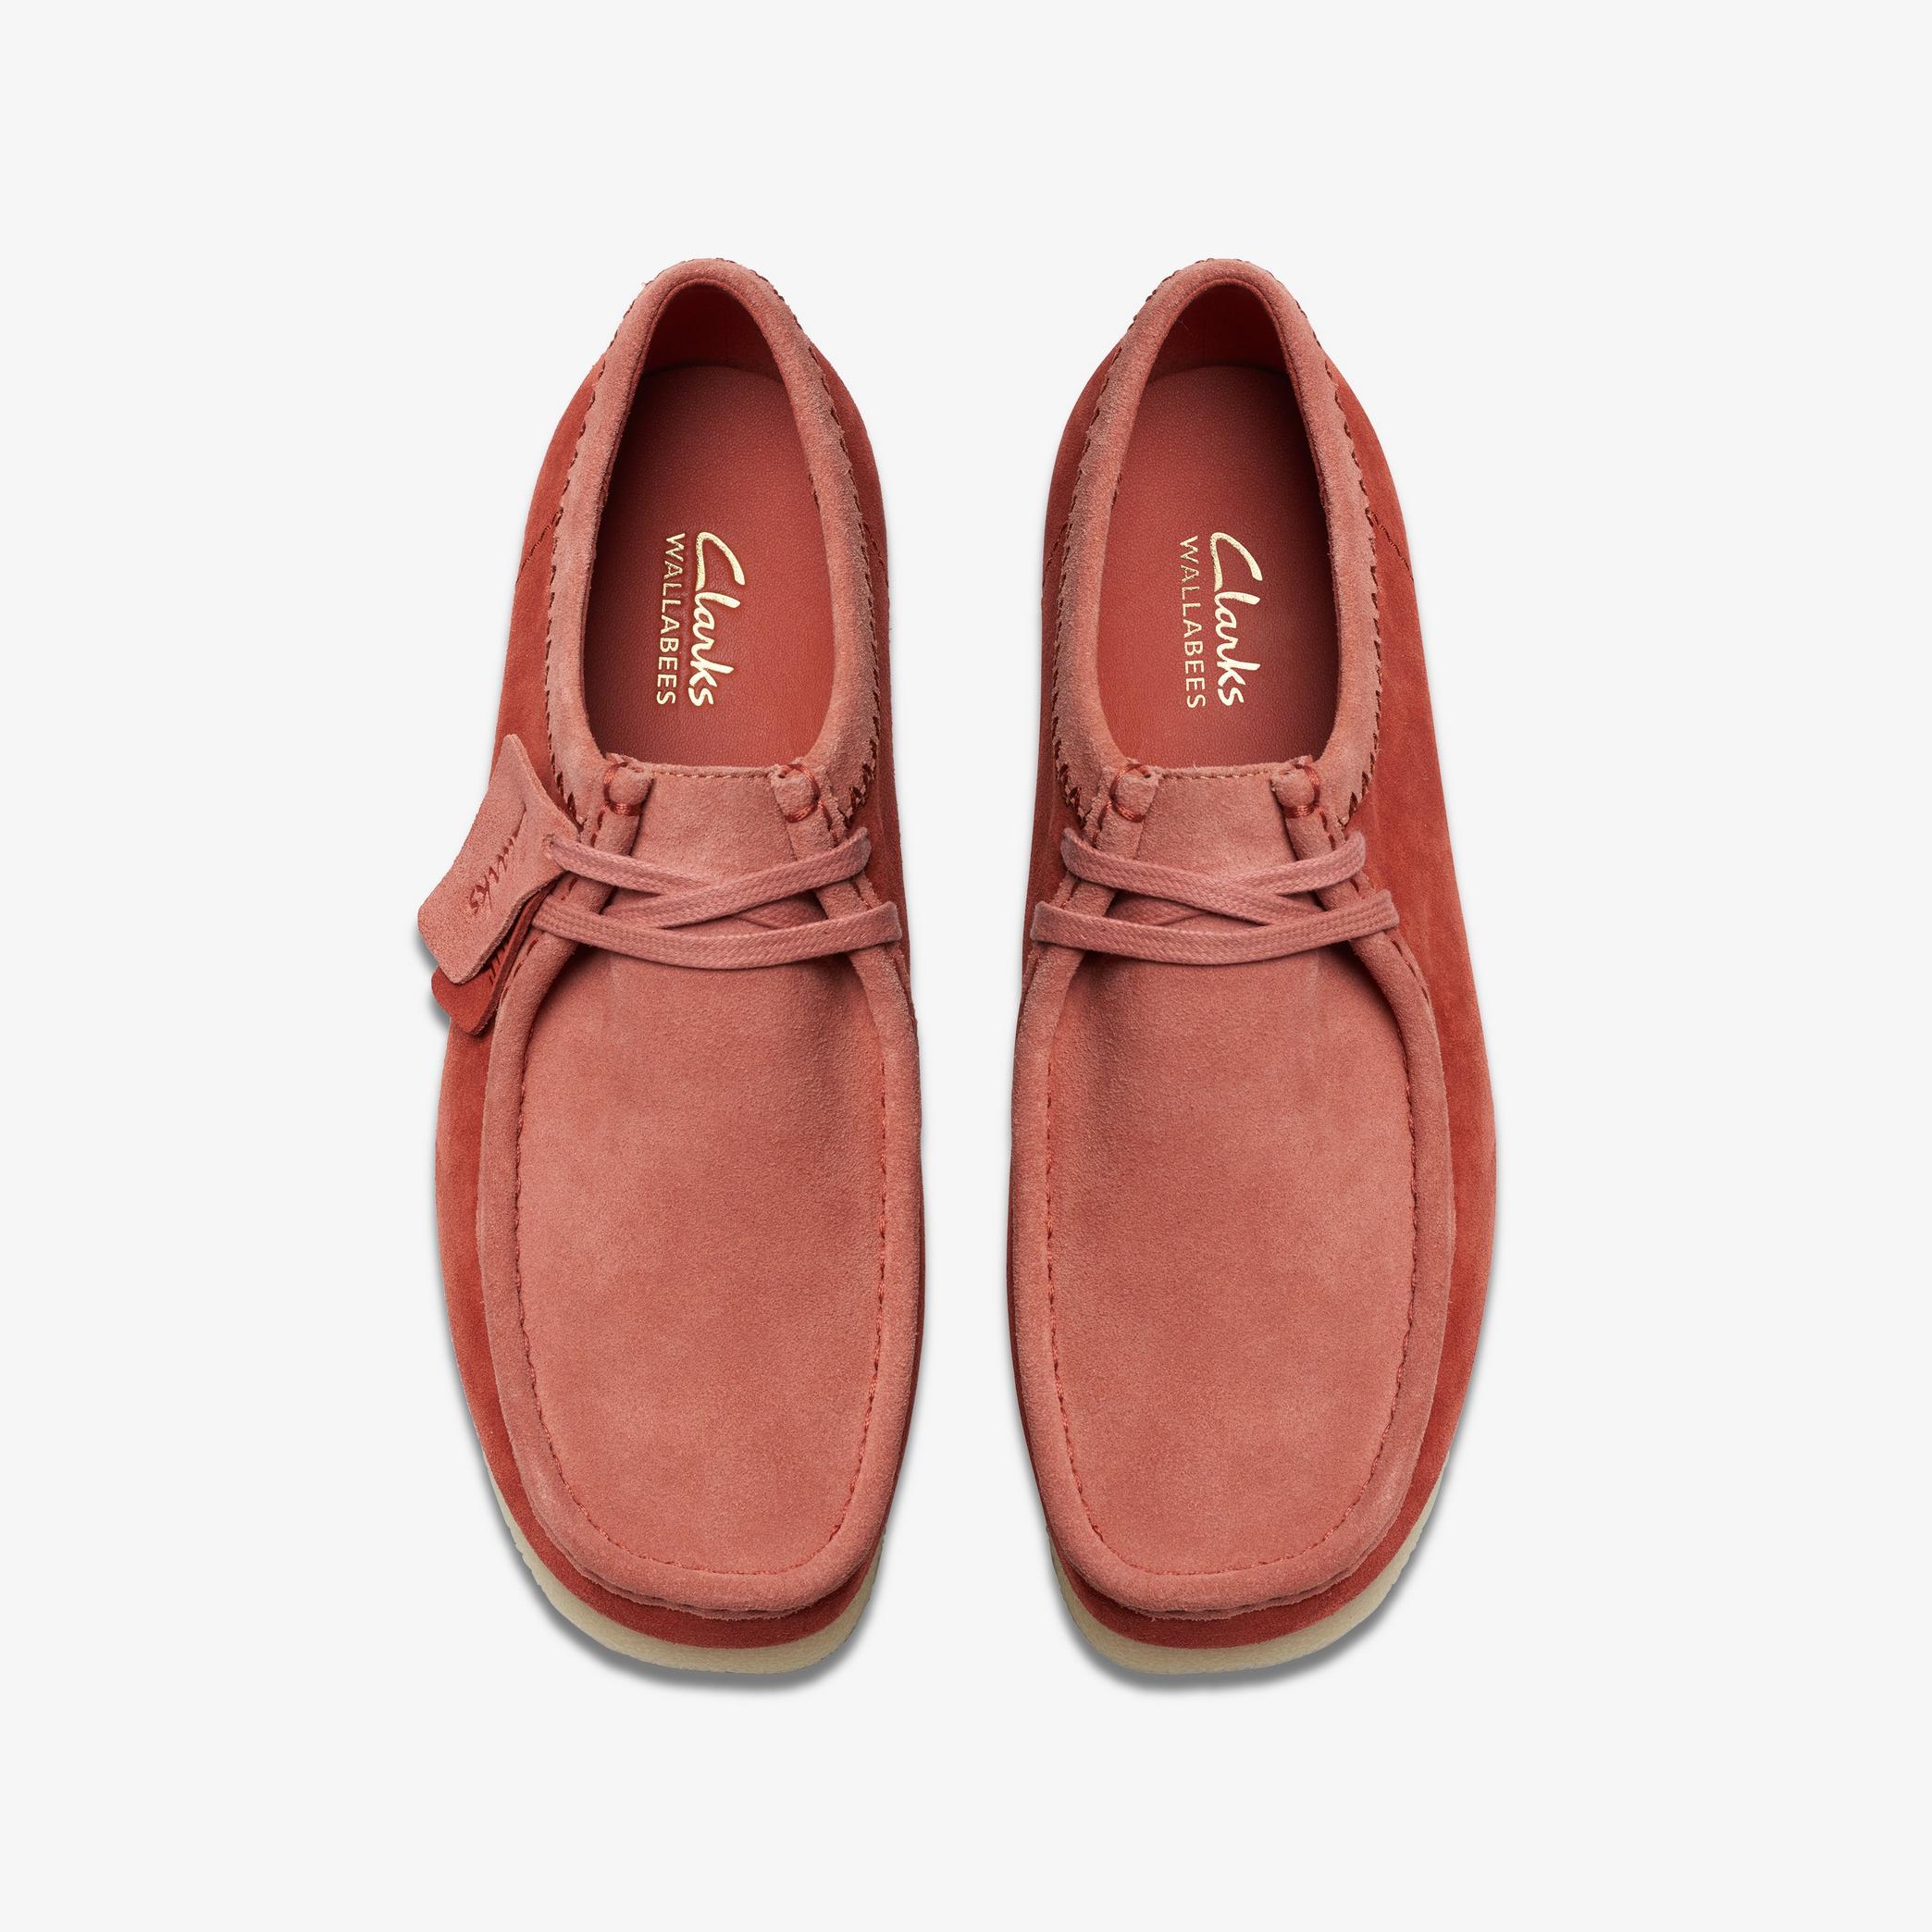 Wallabee EVO Terracotta Suede Moccasins, view 6 of 6